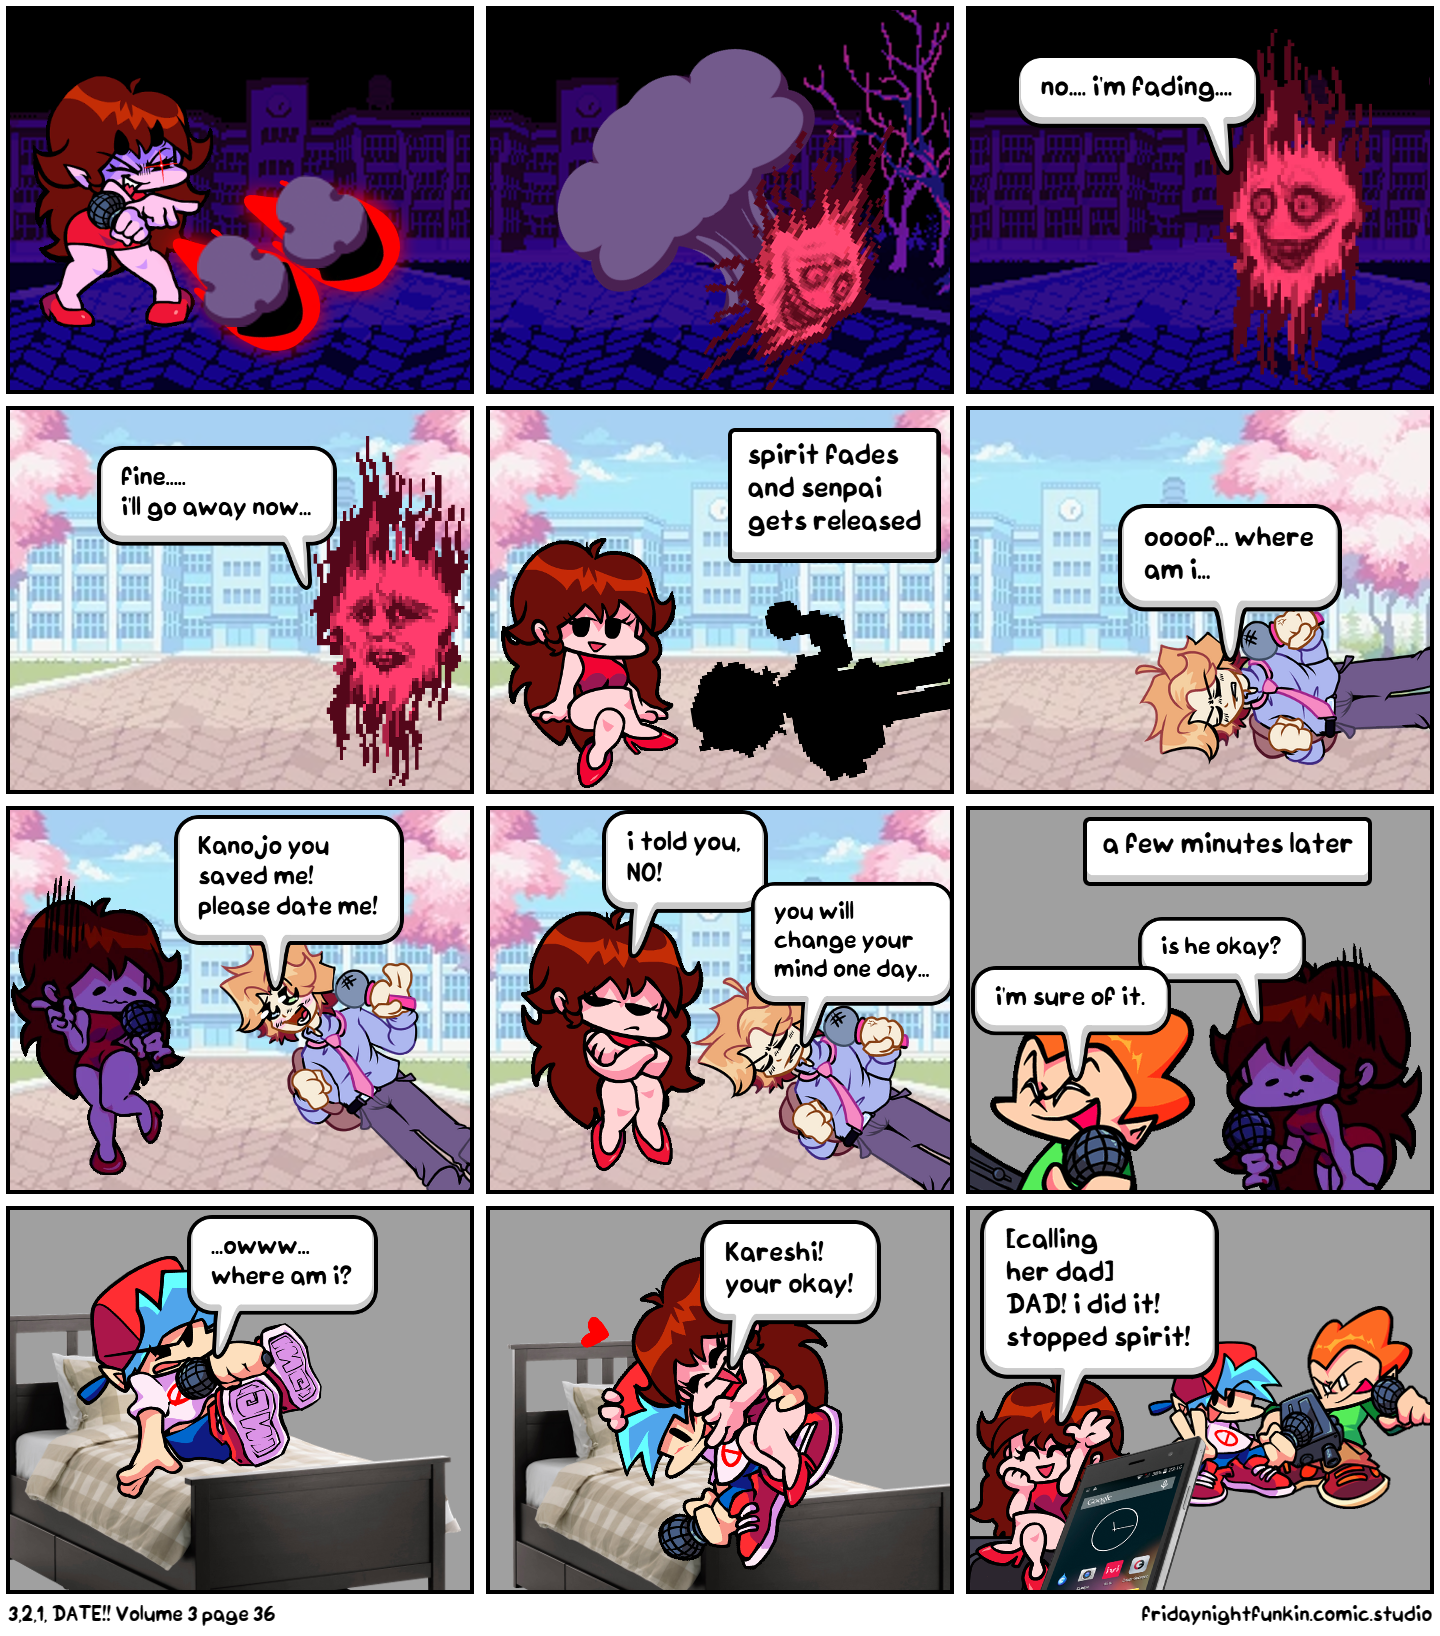 3,2,1, DATE!! Volume 3 page 36